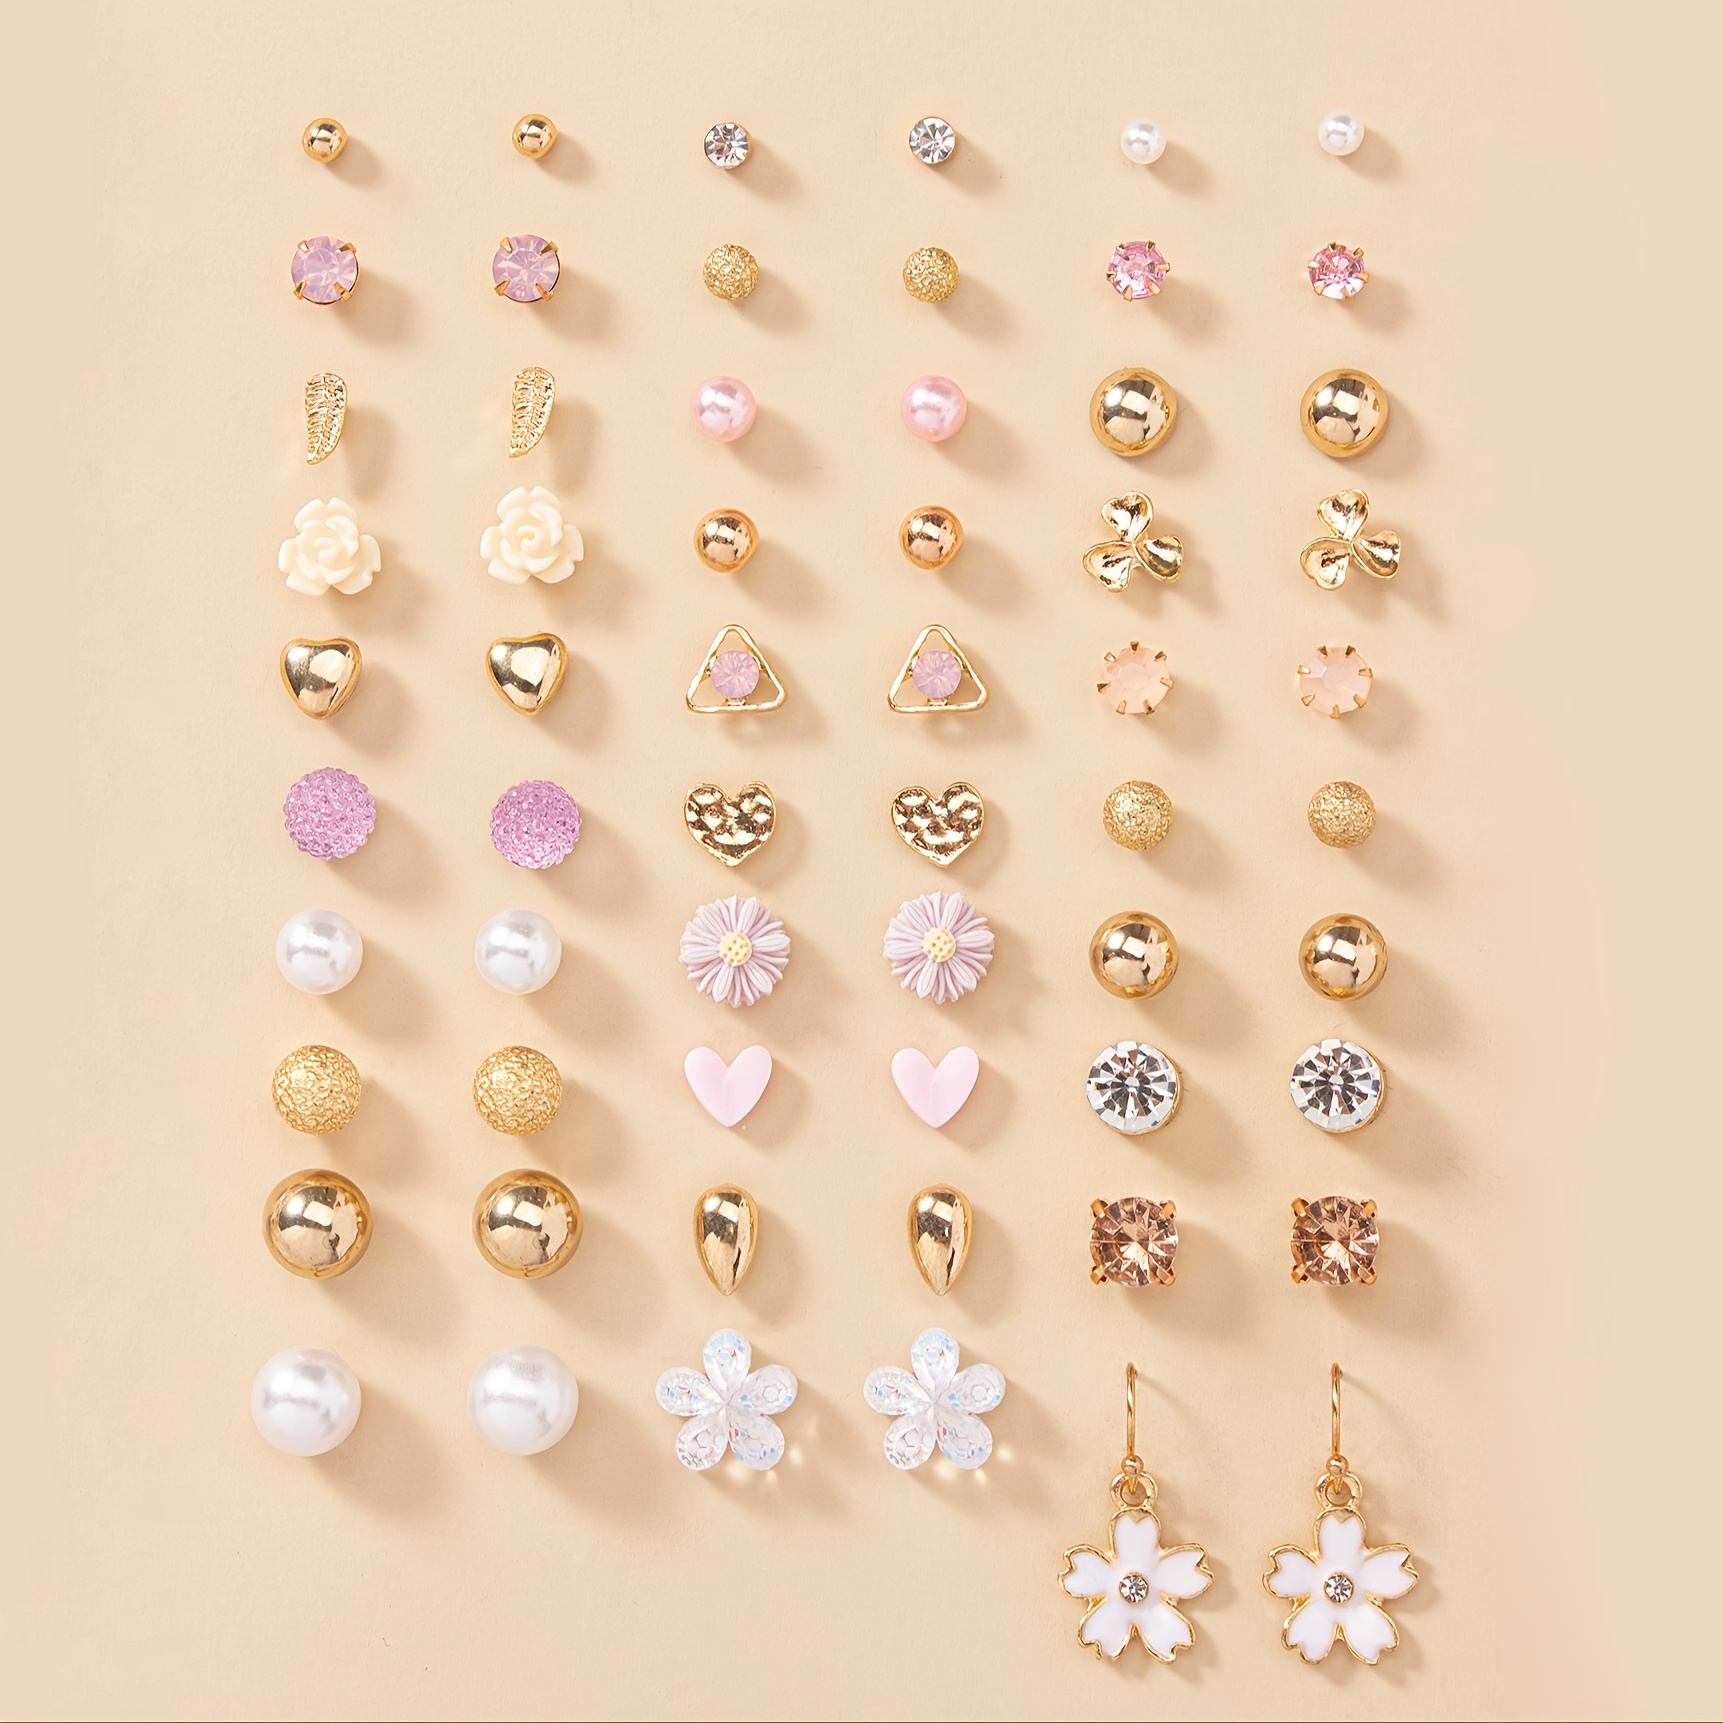 

30 Pairs Set Of Tiny Flower Triangle Round Heart Shaped Stud Earrings Zinc Alloy Jewelry Rhinestones Inlaid Trendy Female Gift Daily Wear